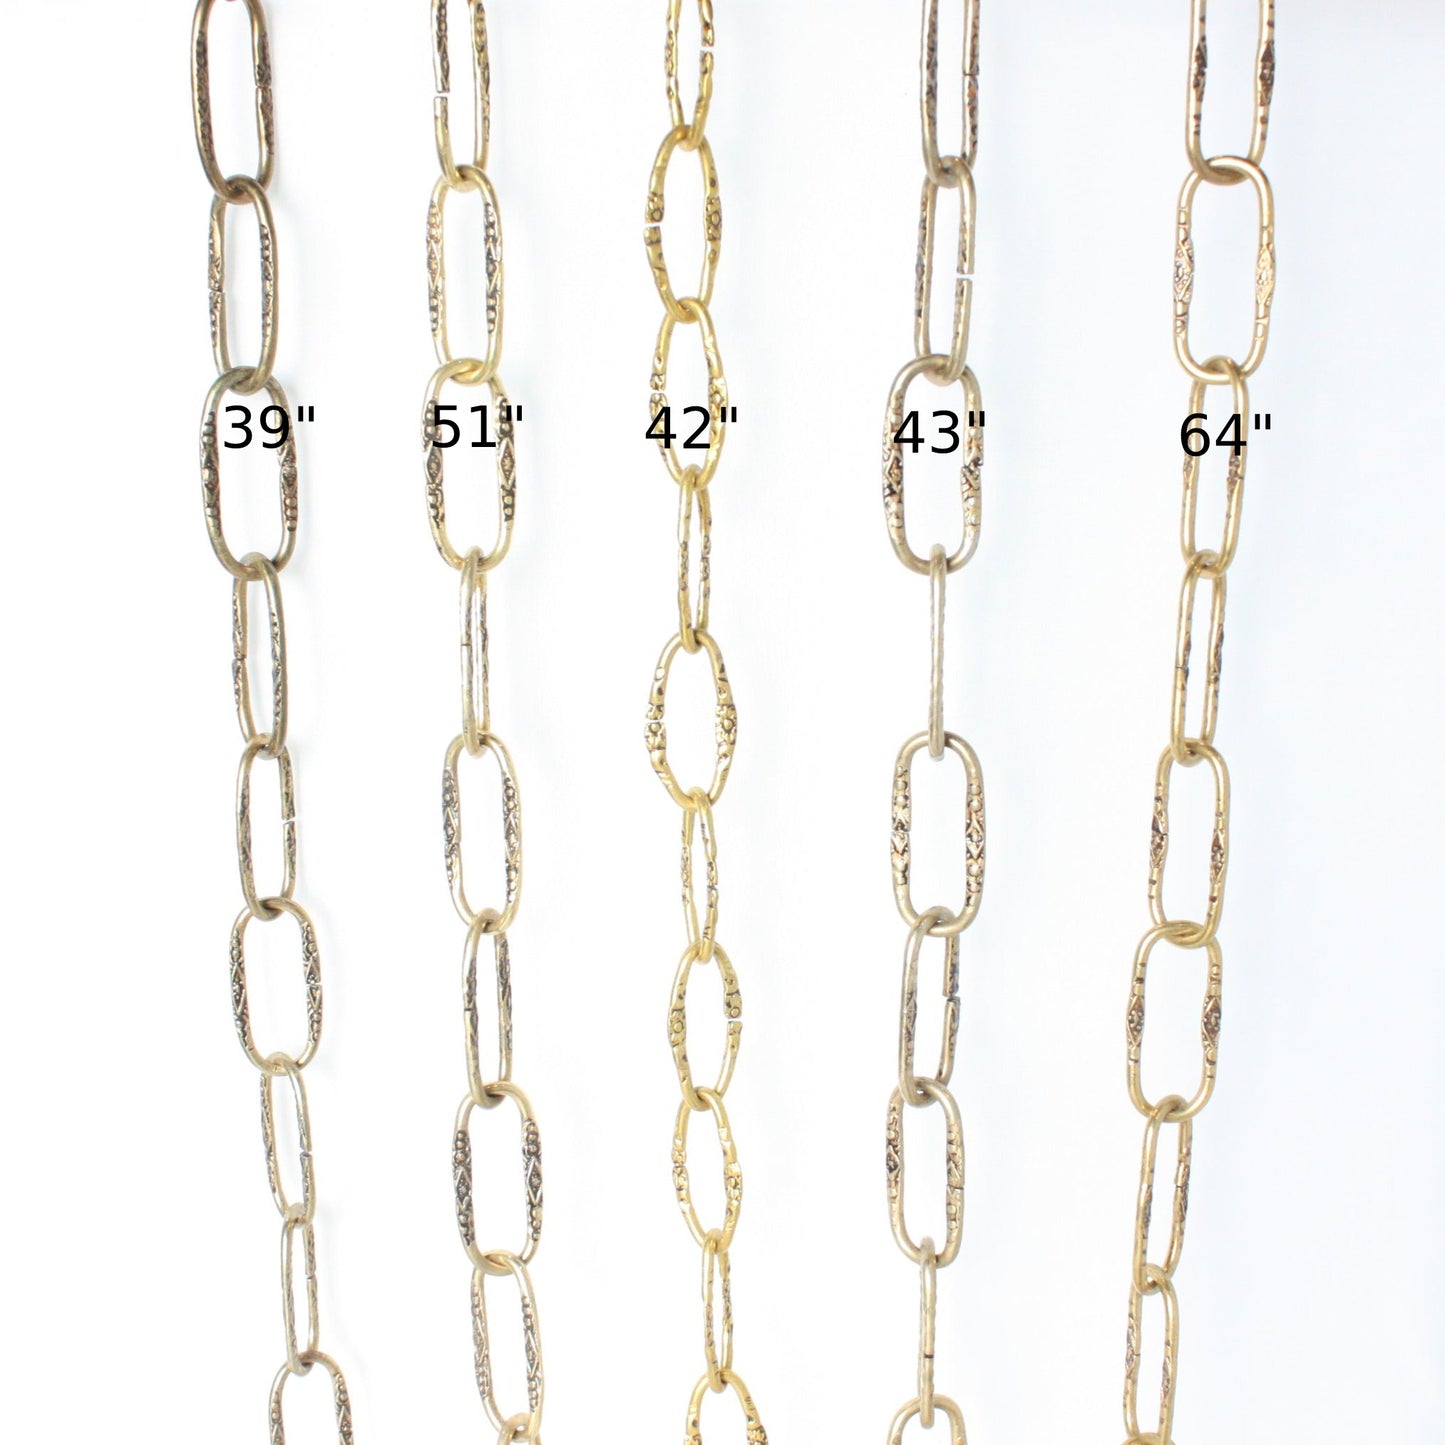 Box of Patterned Brass Plated Spanish Iron Chain, Over 13" (Box of 22)